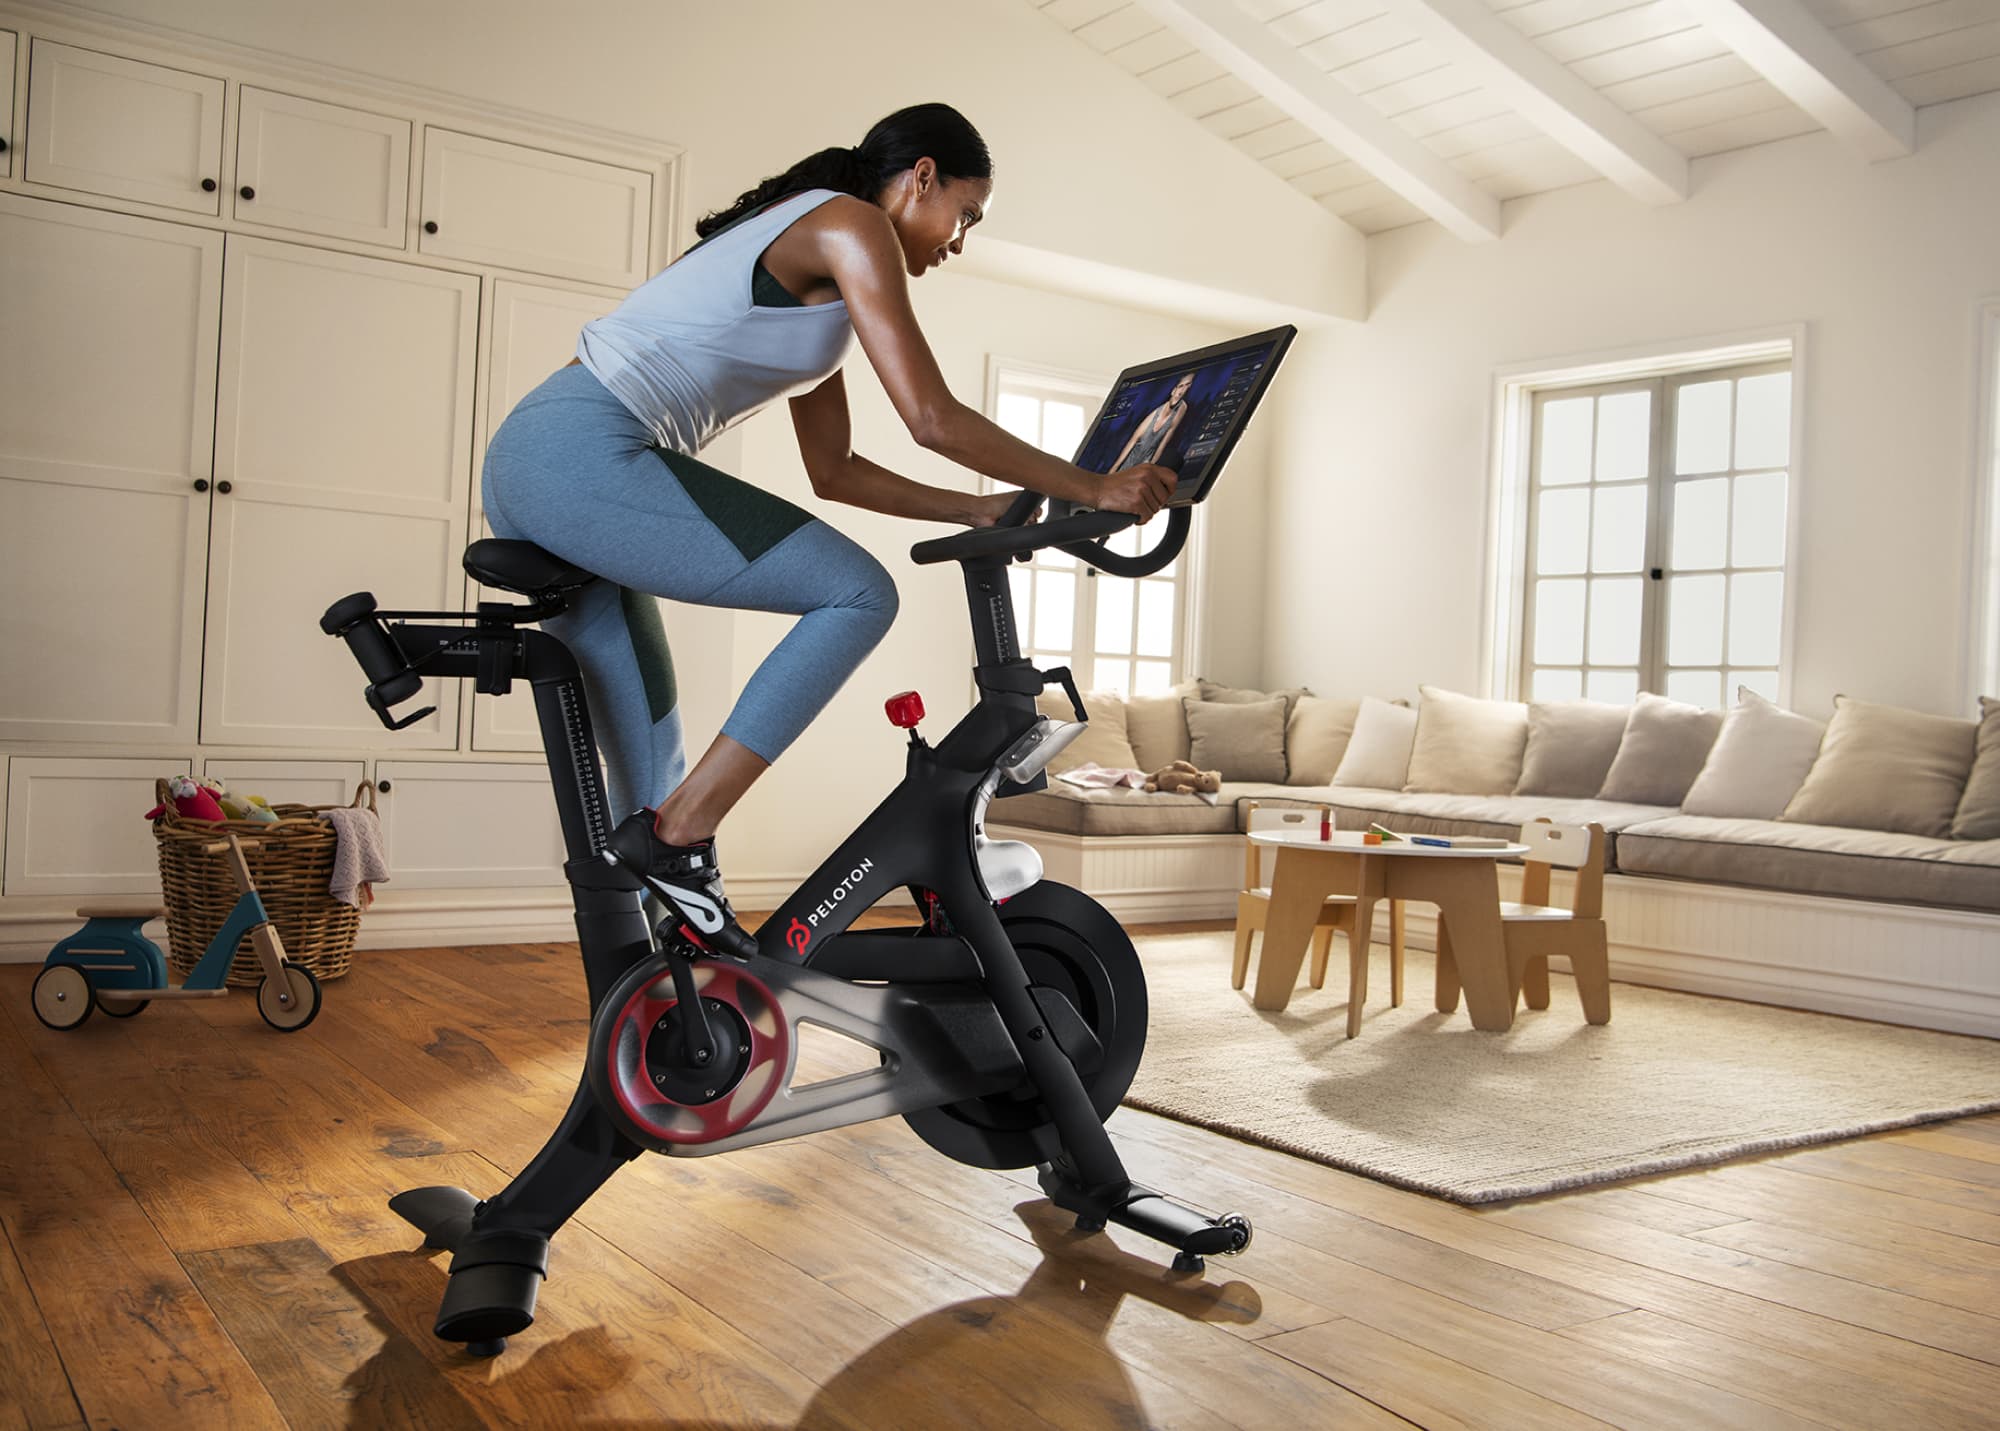 Here are Wednesday’s biggest analyst calls of the day: Peloton, Meta, Target, Chevron & more